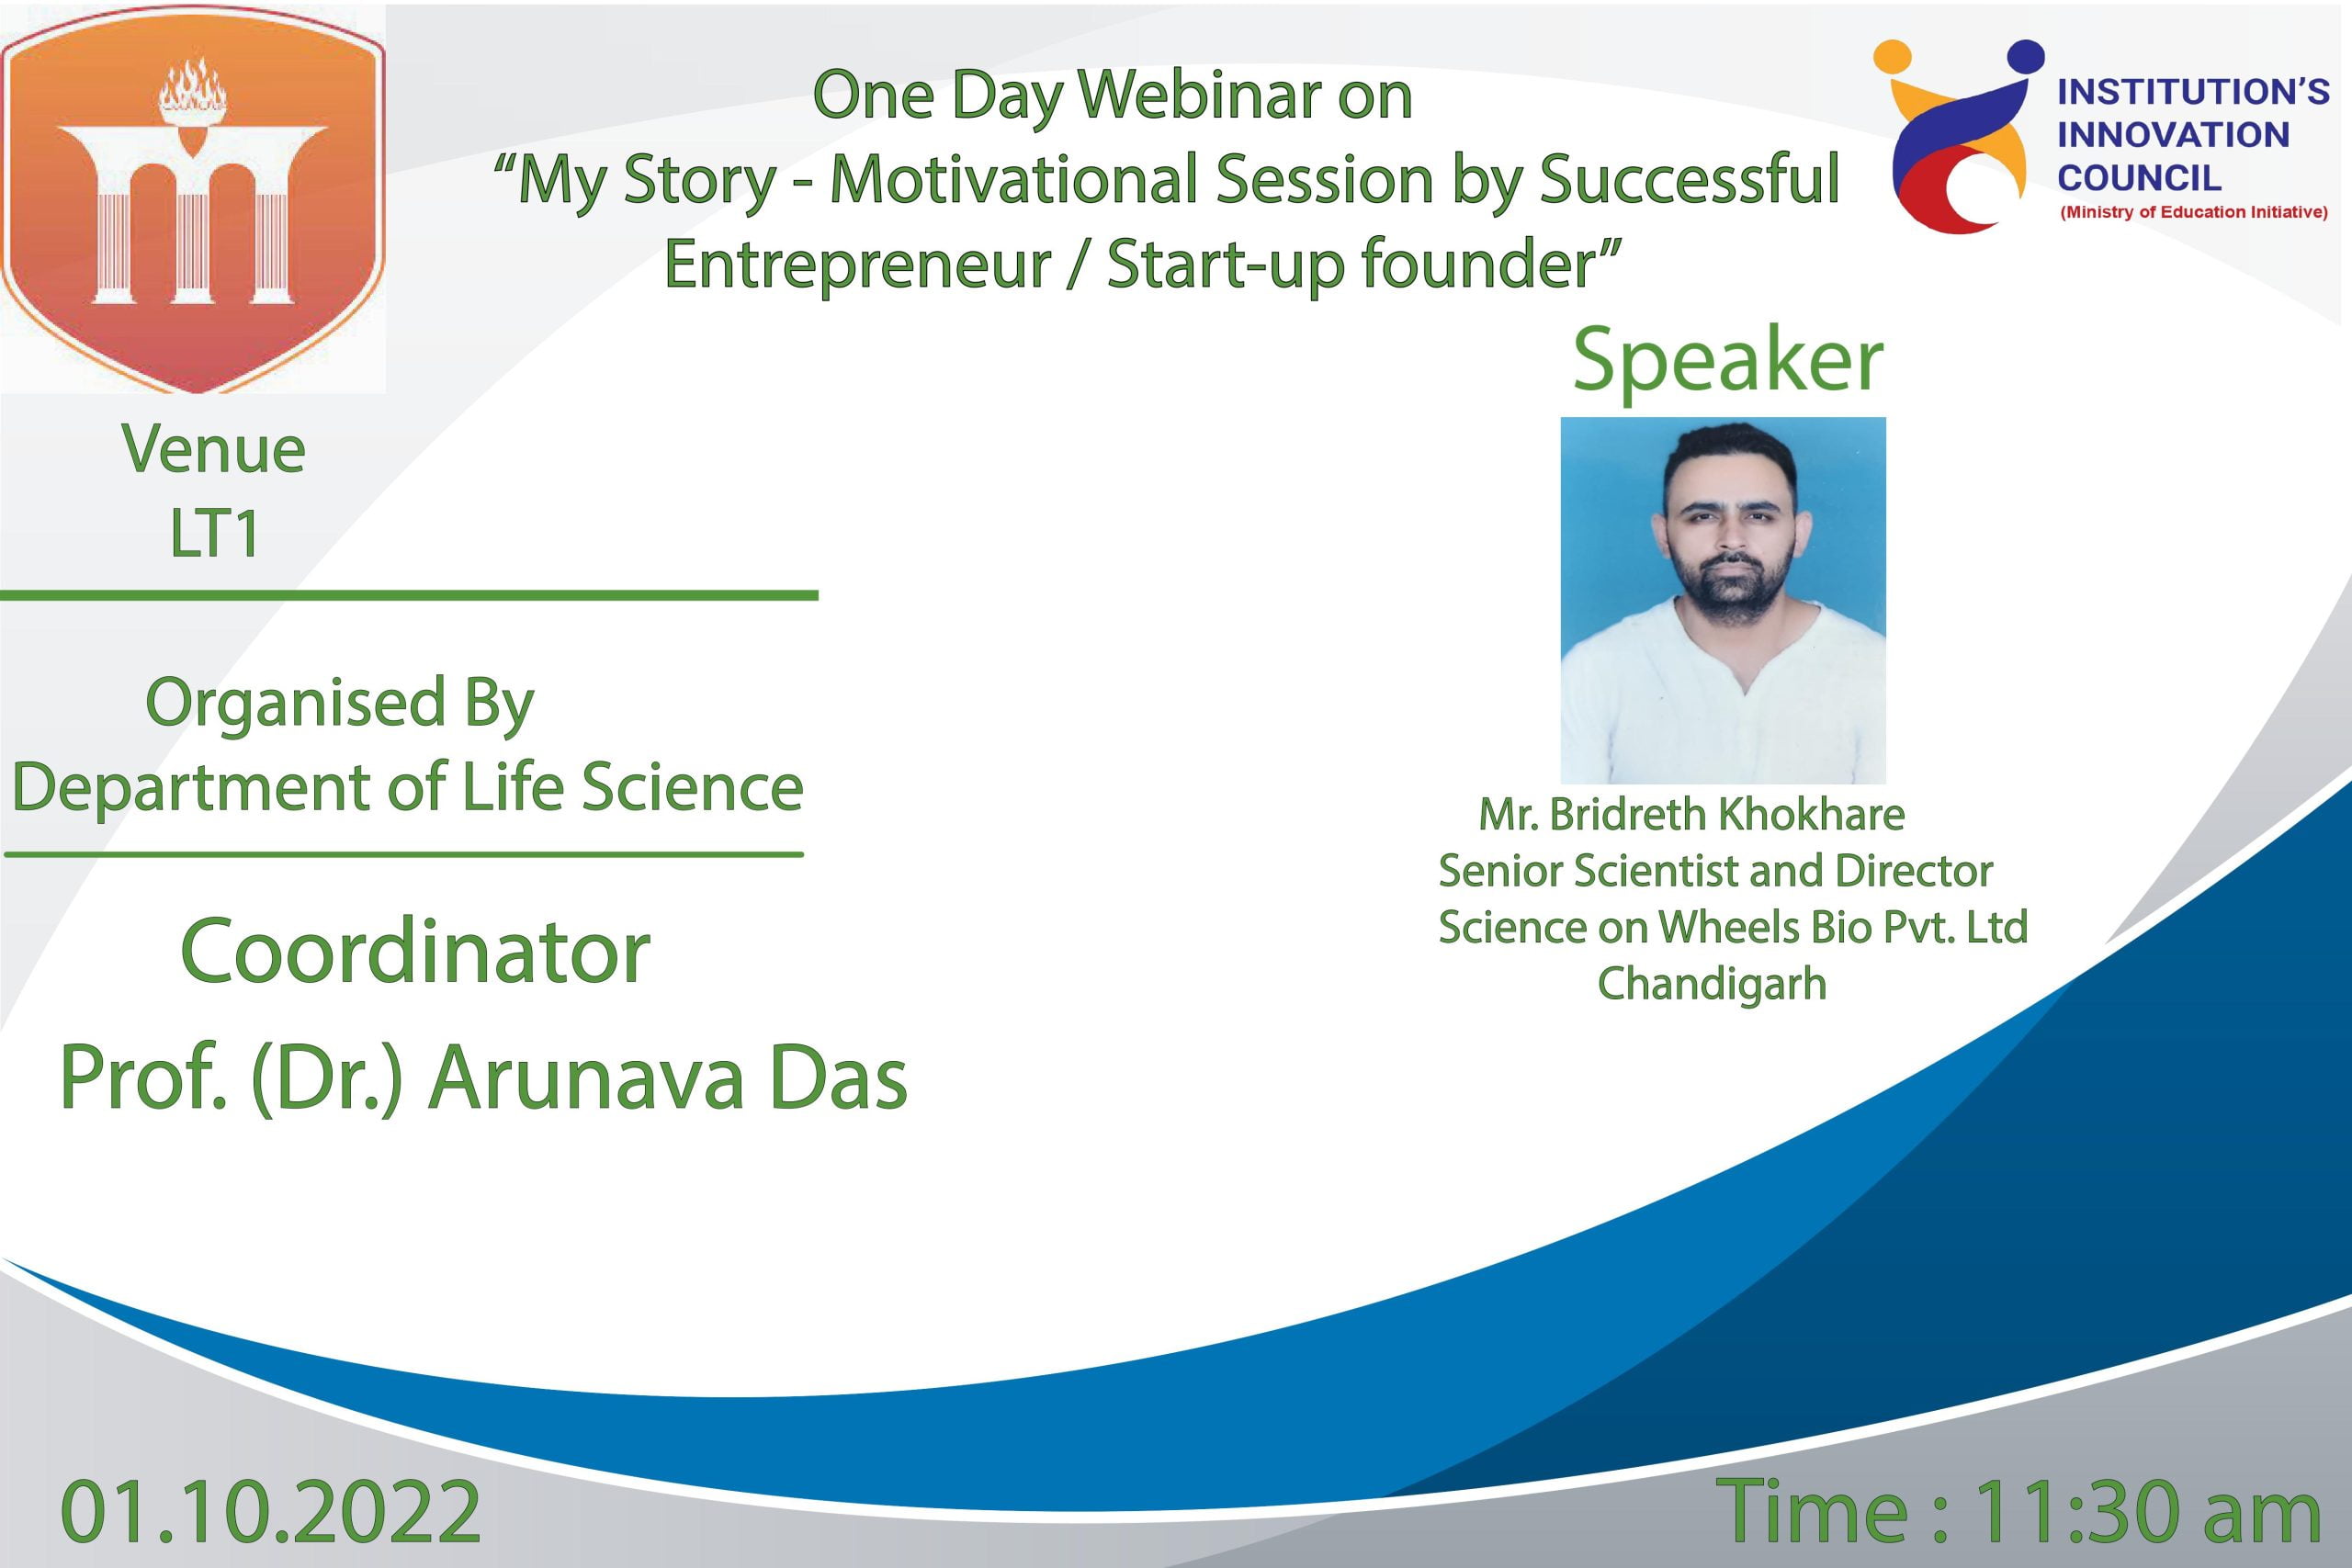 My Story – Motivational Session by Successful Entrepreneur / Start-up founder